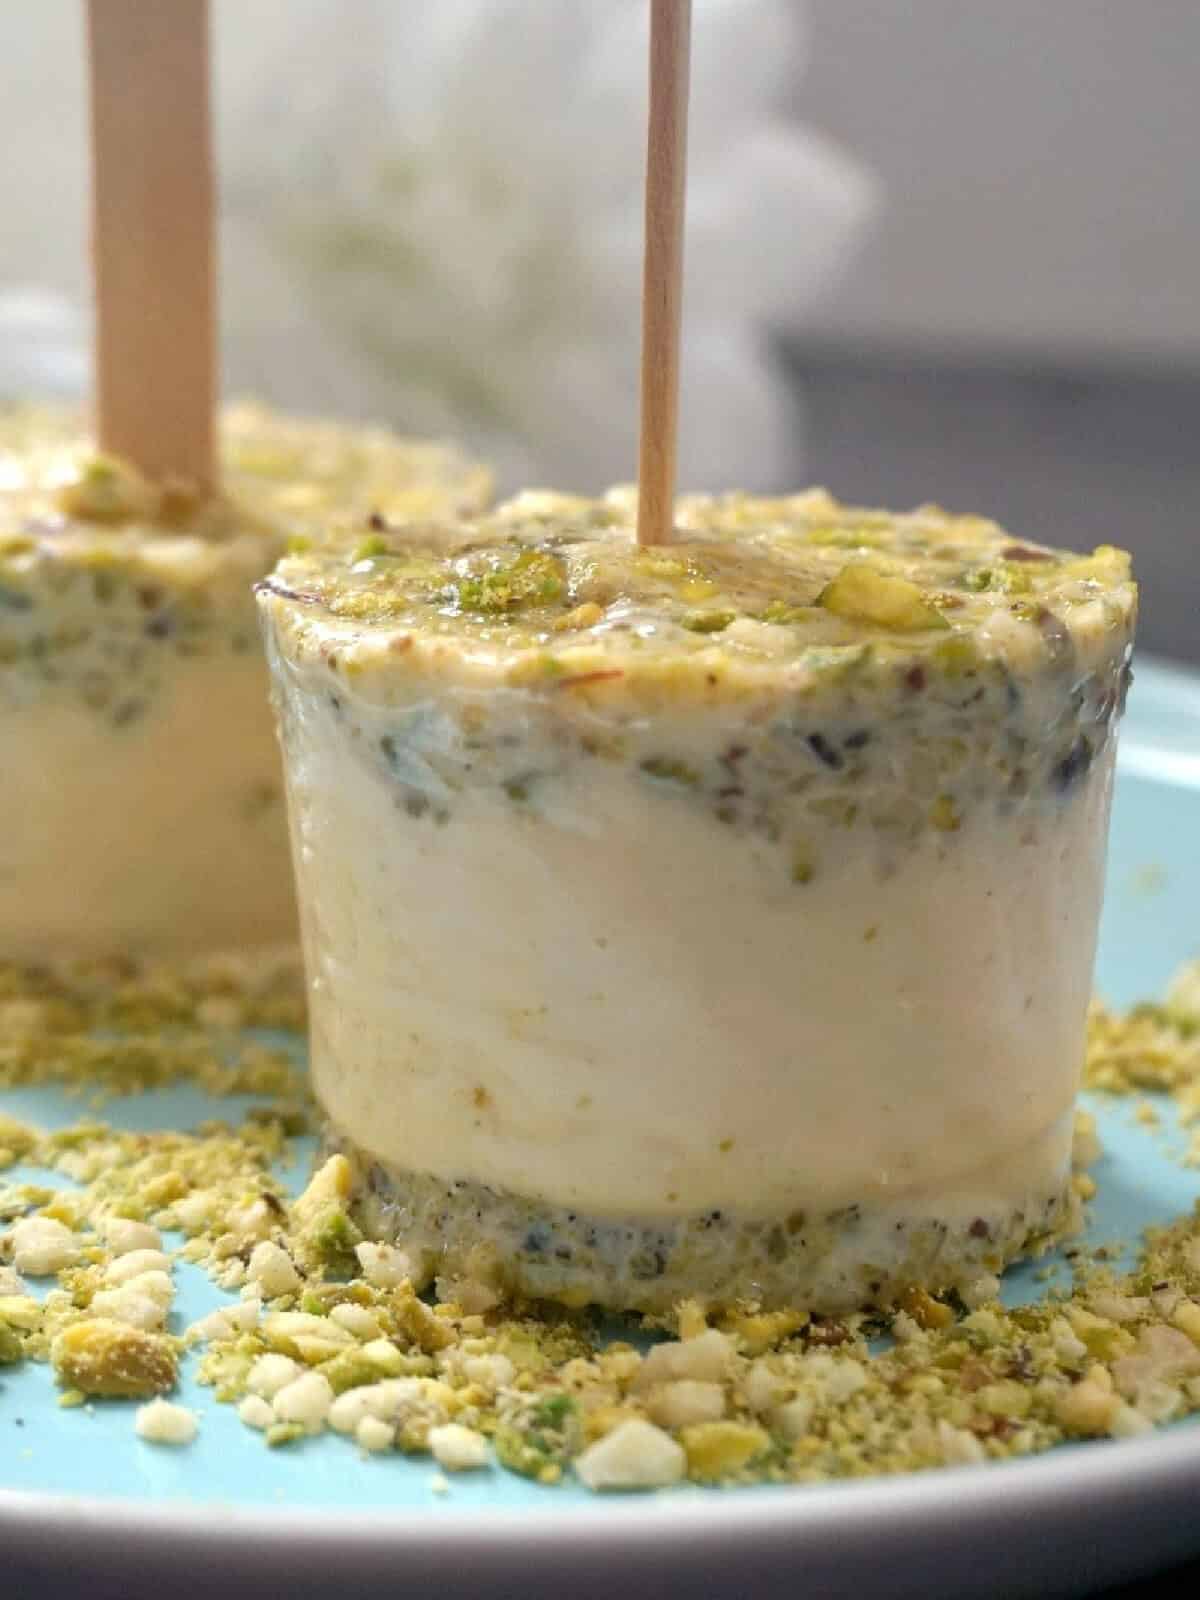 2 kulfi ice creams on a bed of chopped pistachios.